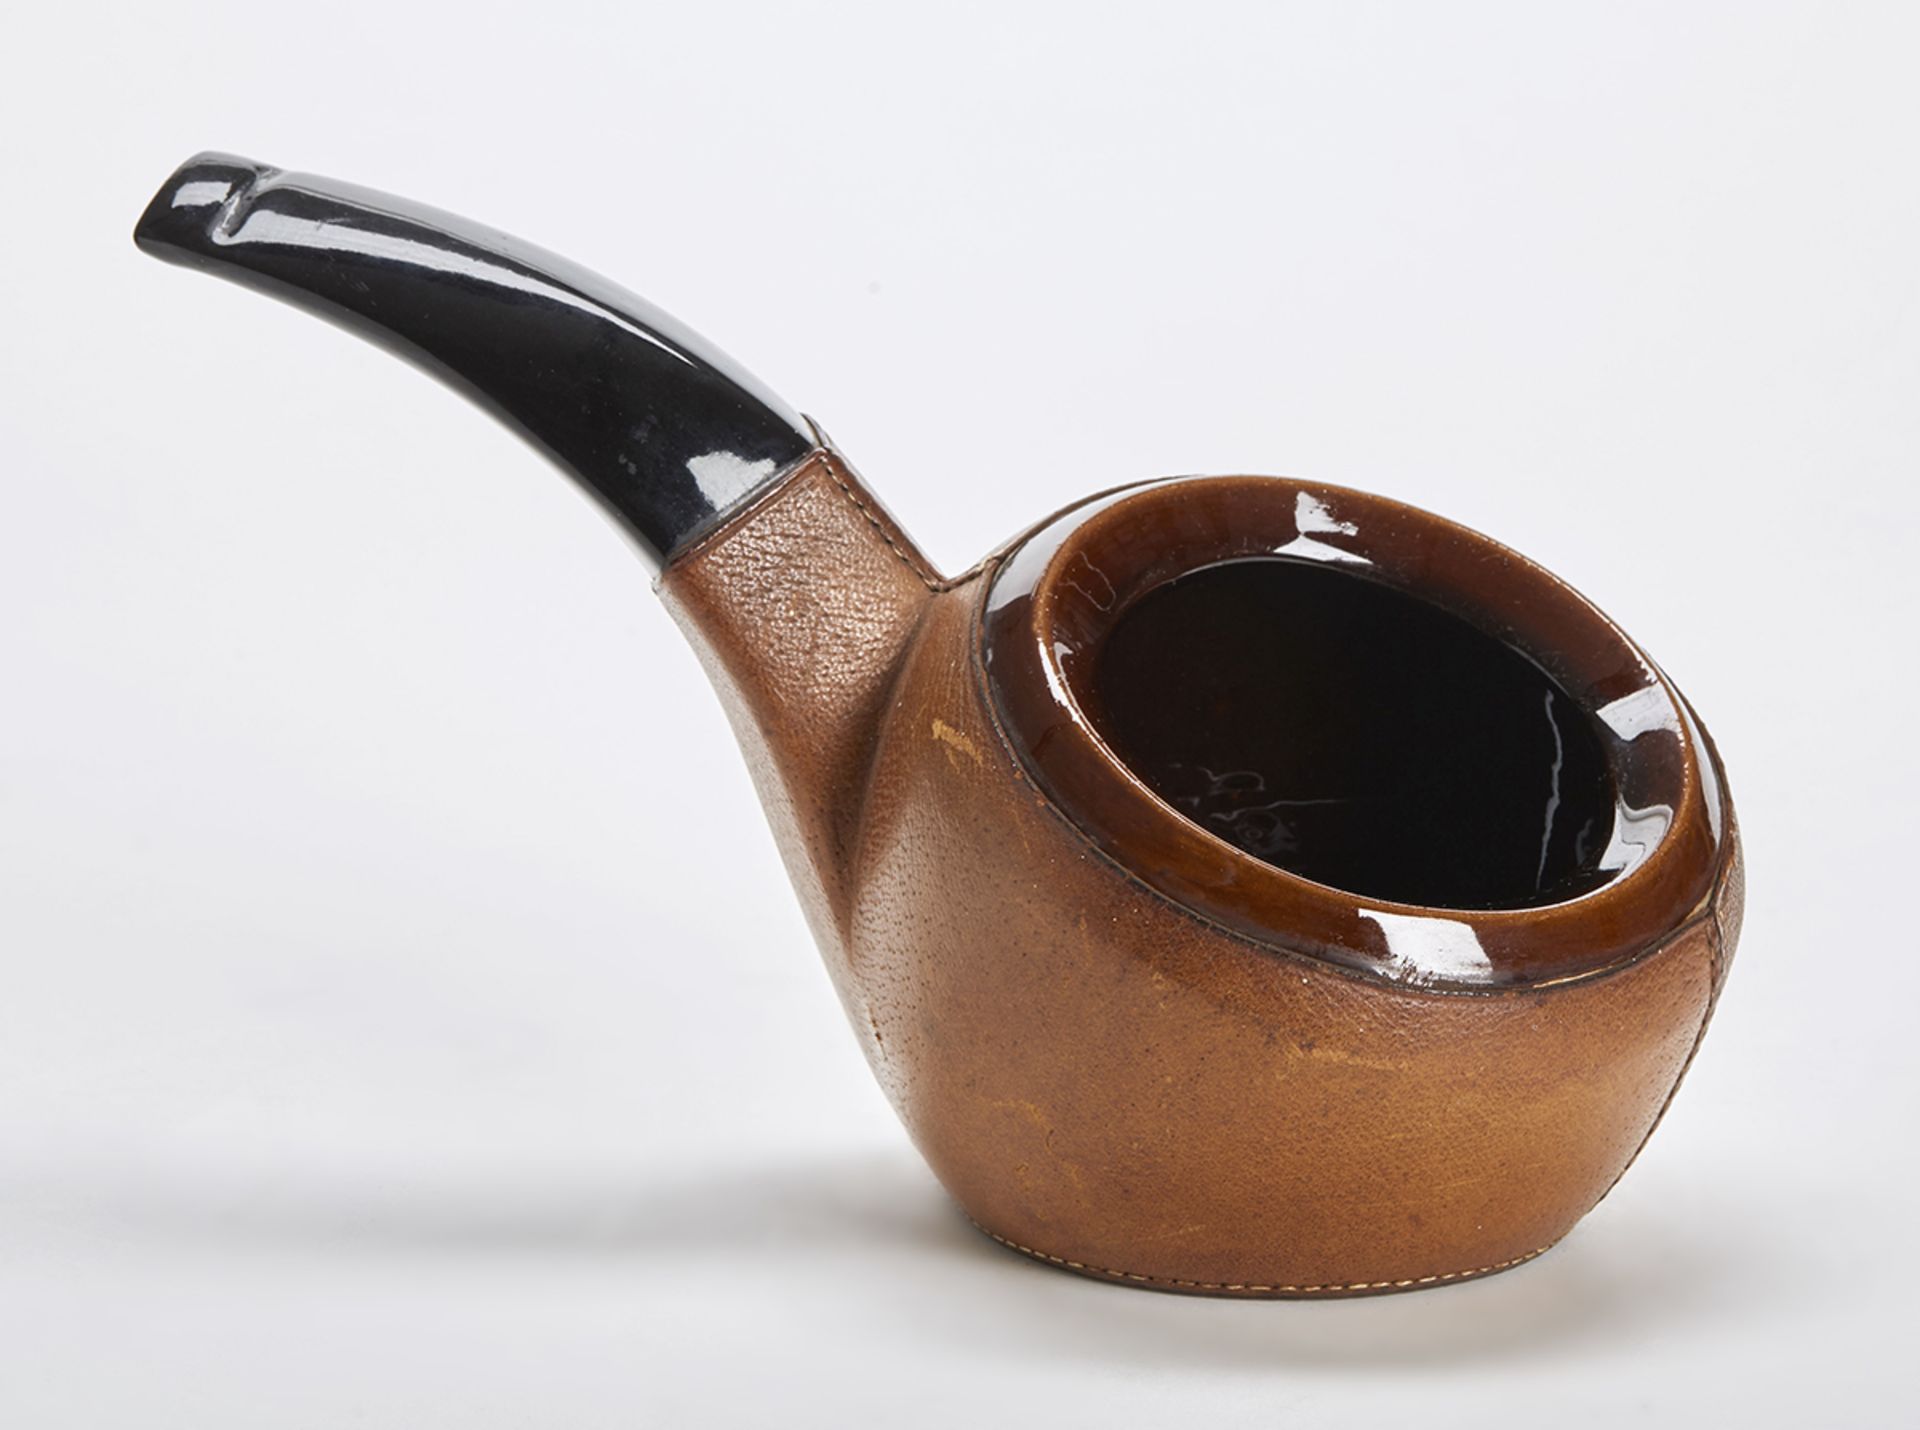 Ceramic & Leather Pipe Container By George Jouve C.1950 - Image 2 of 7